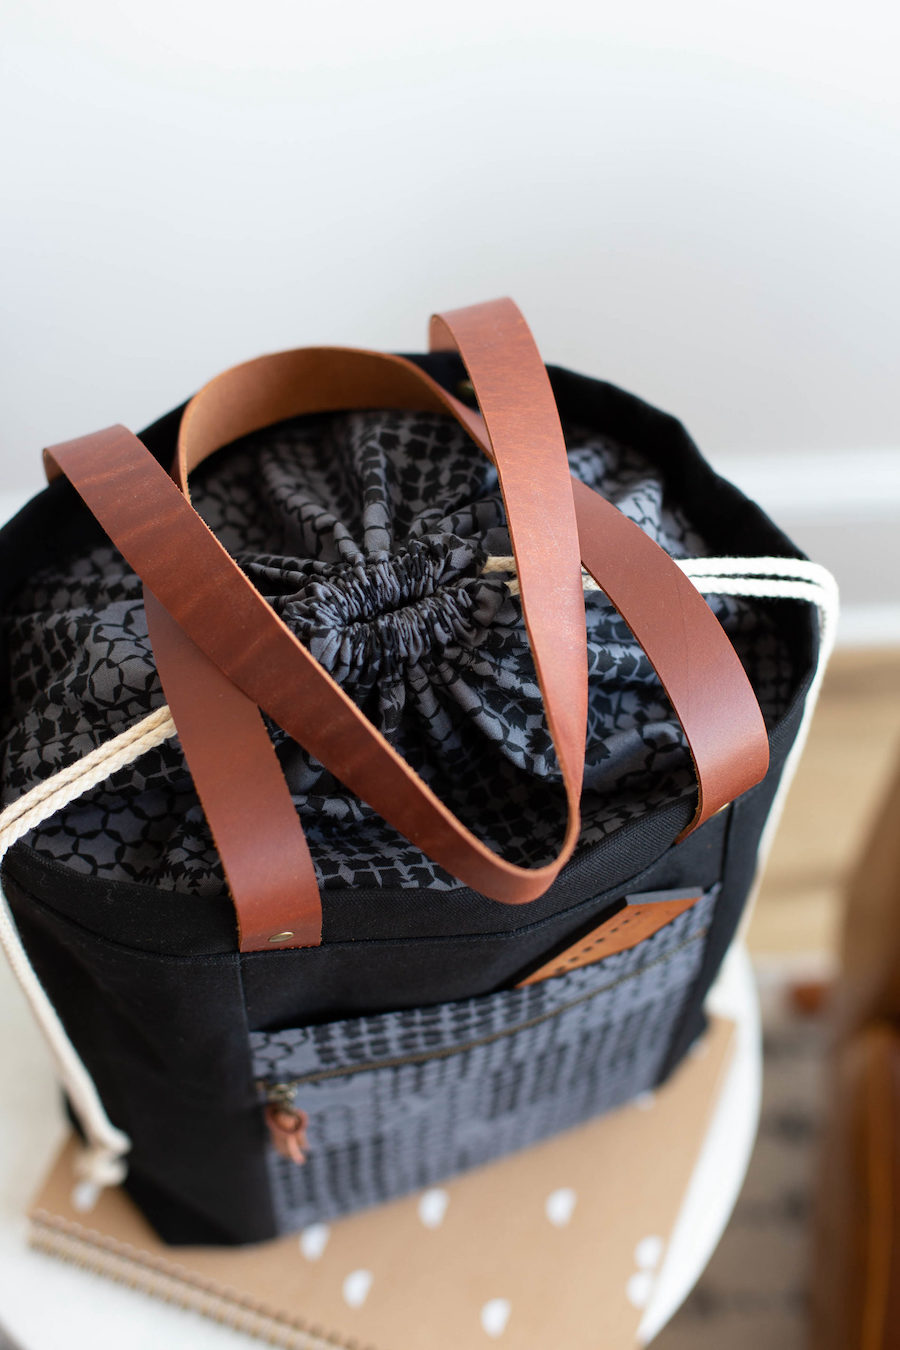 Firefly Tote Pattern by Noodlehead